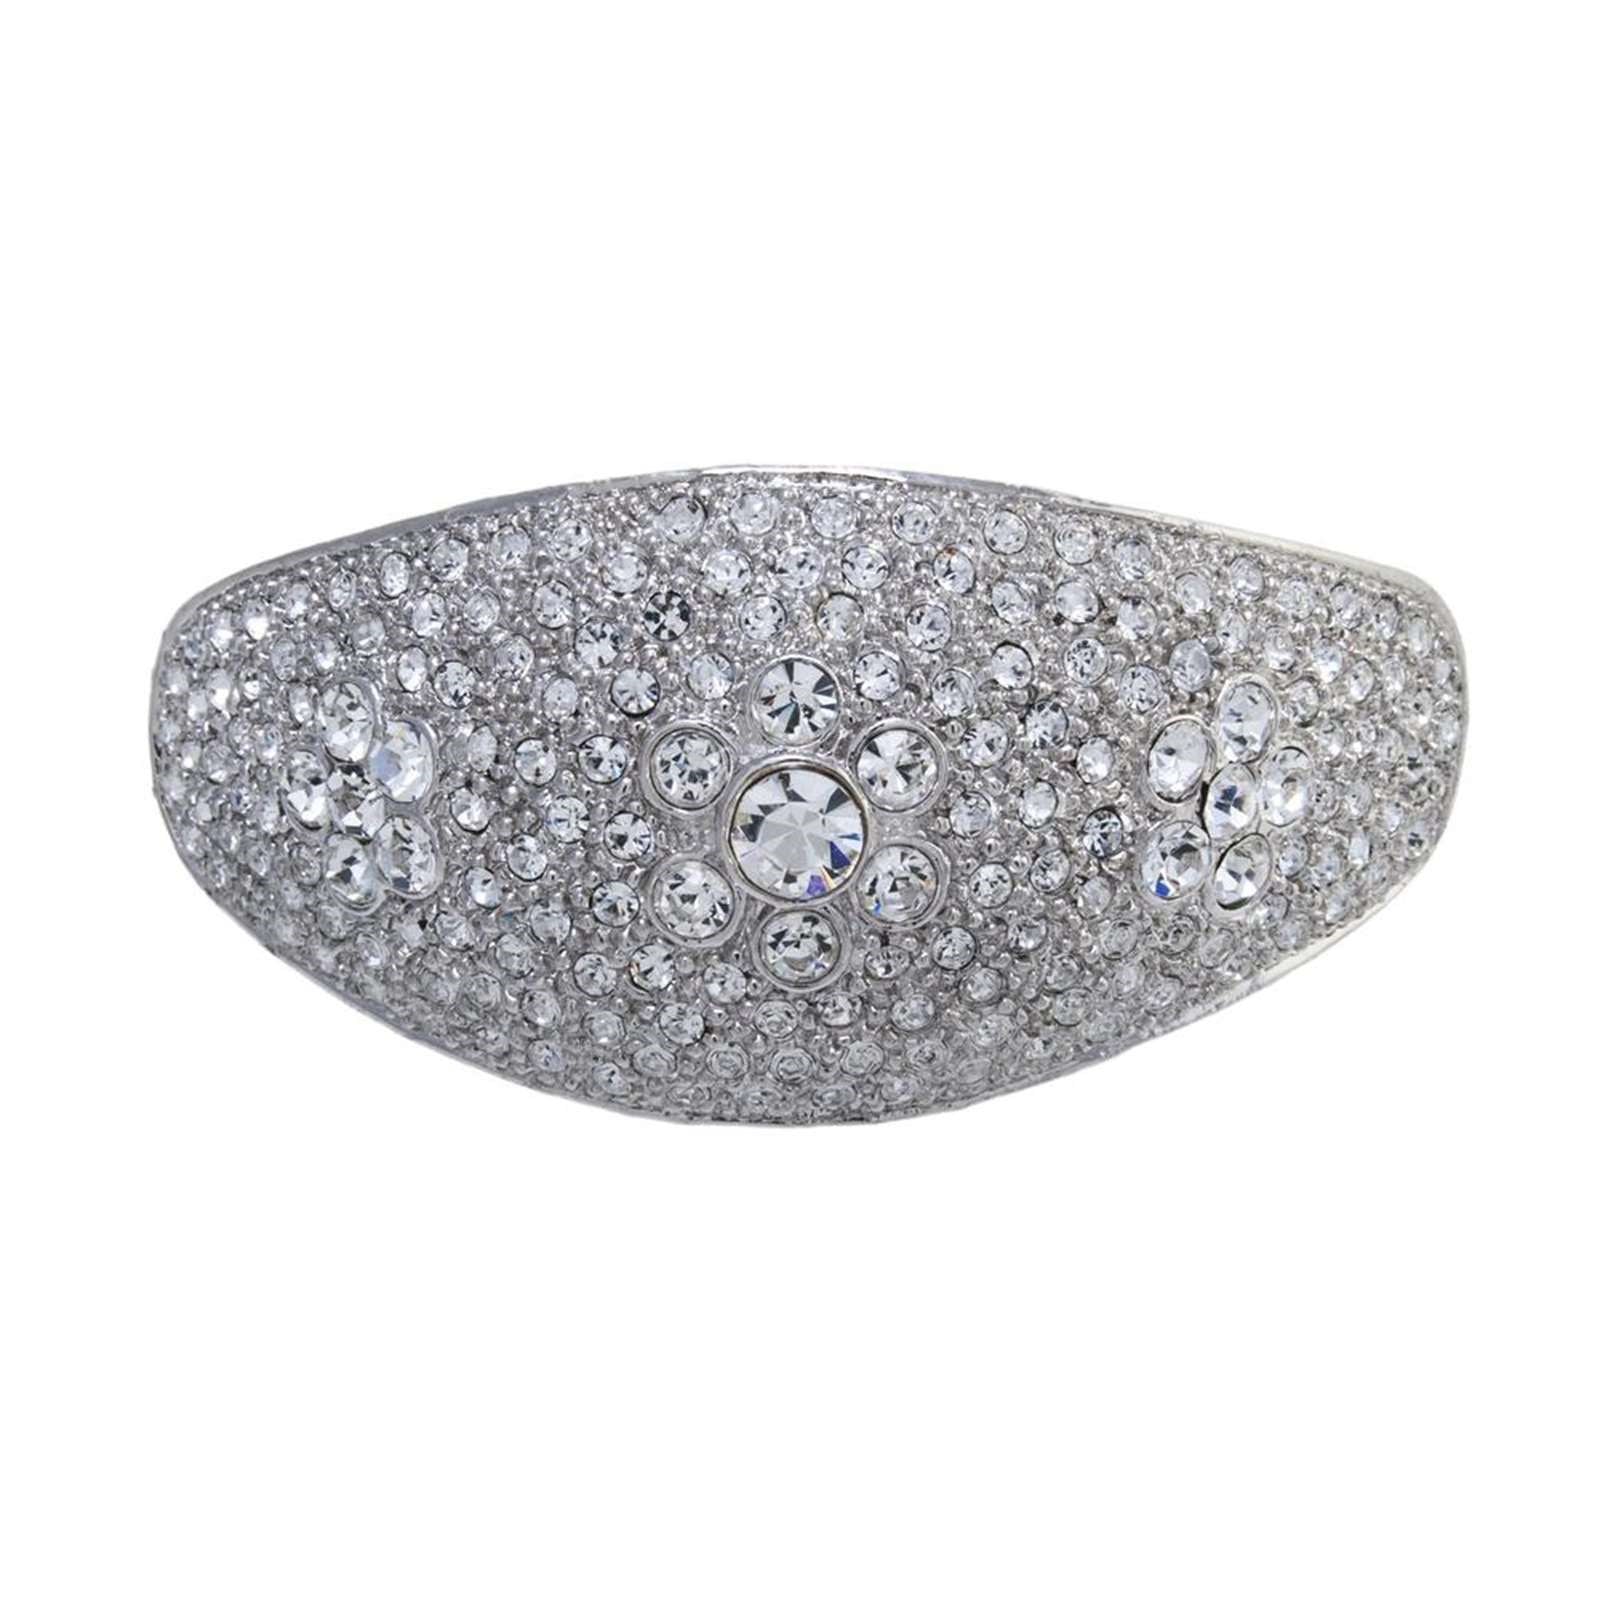 Athra Women Large Crystal Barrette